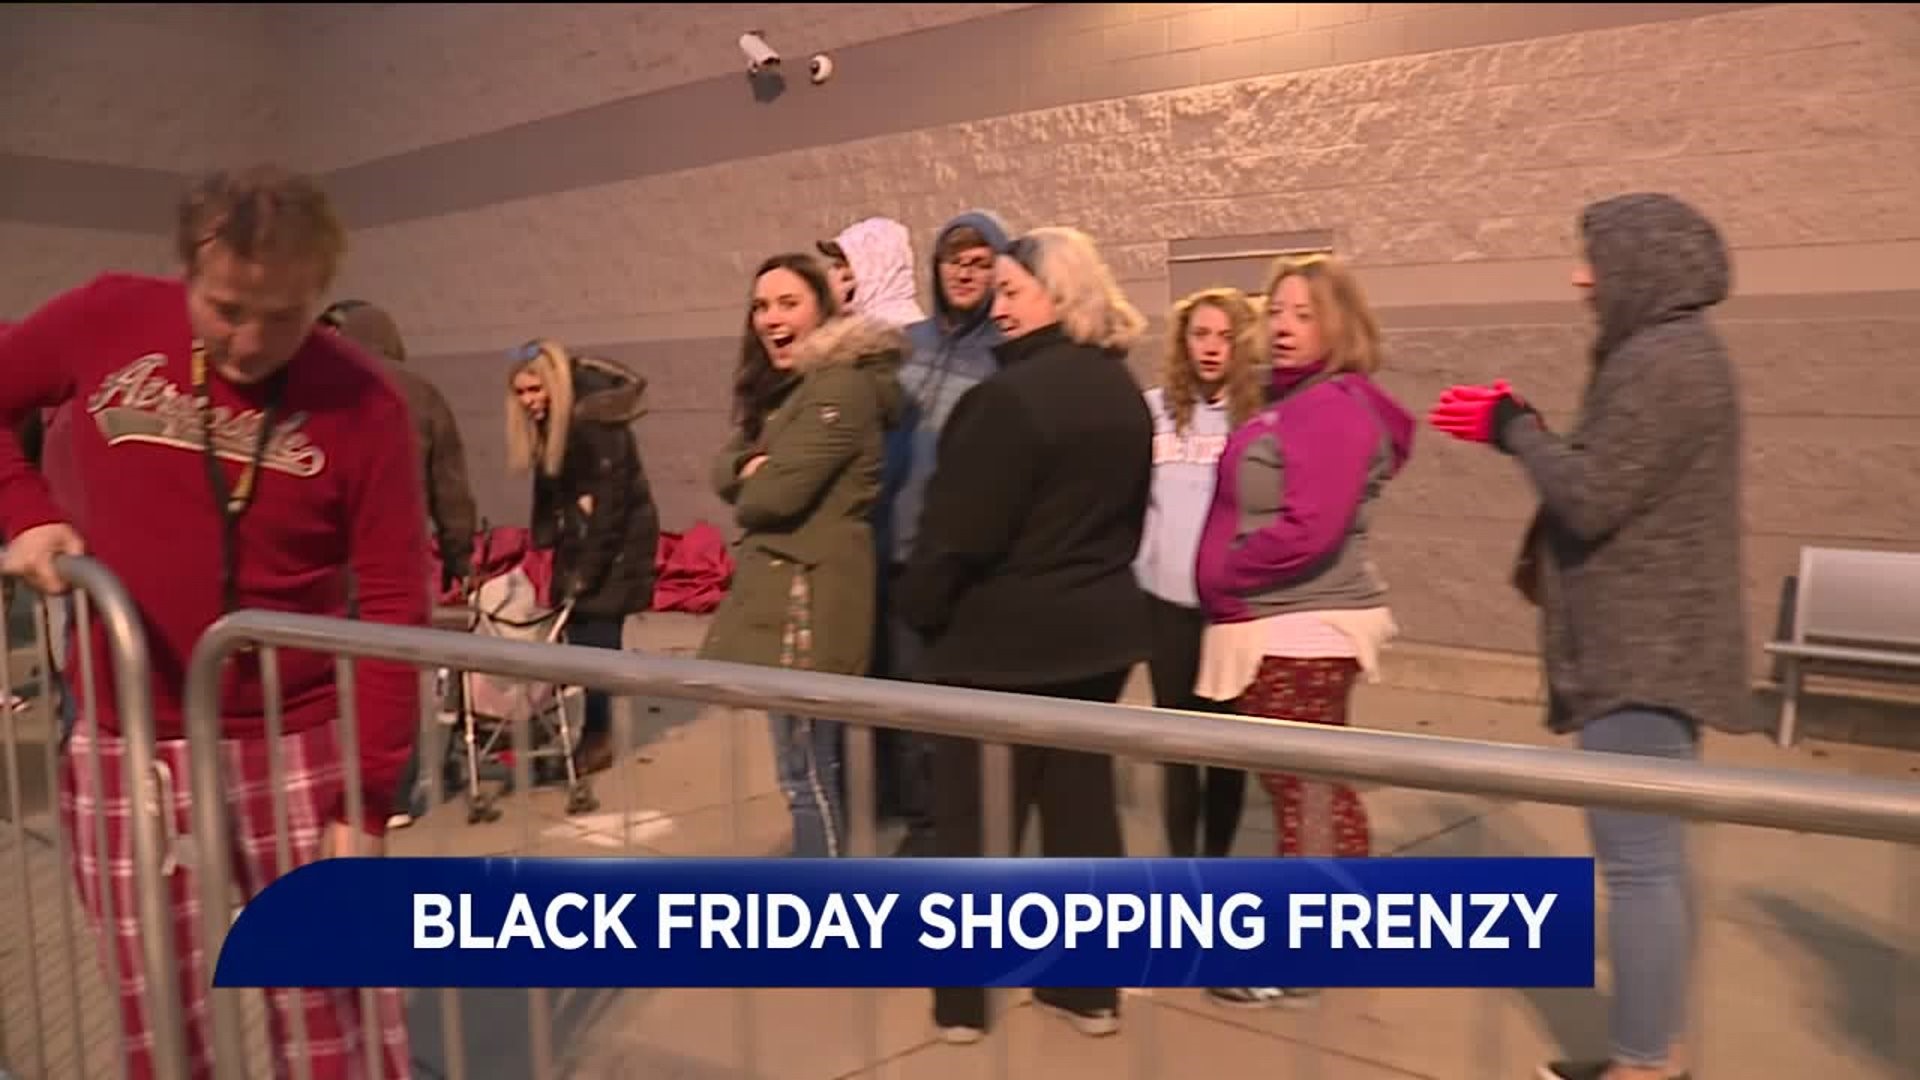 Searching for Black Friday Deals in Luzerne County